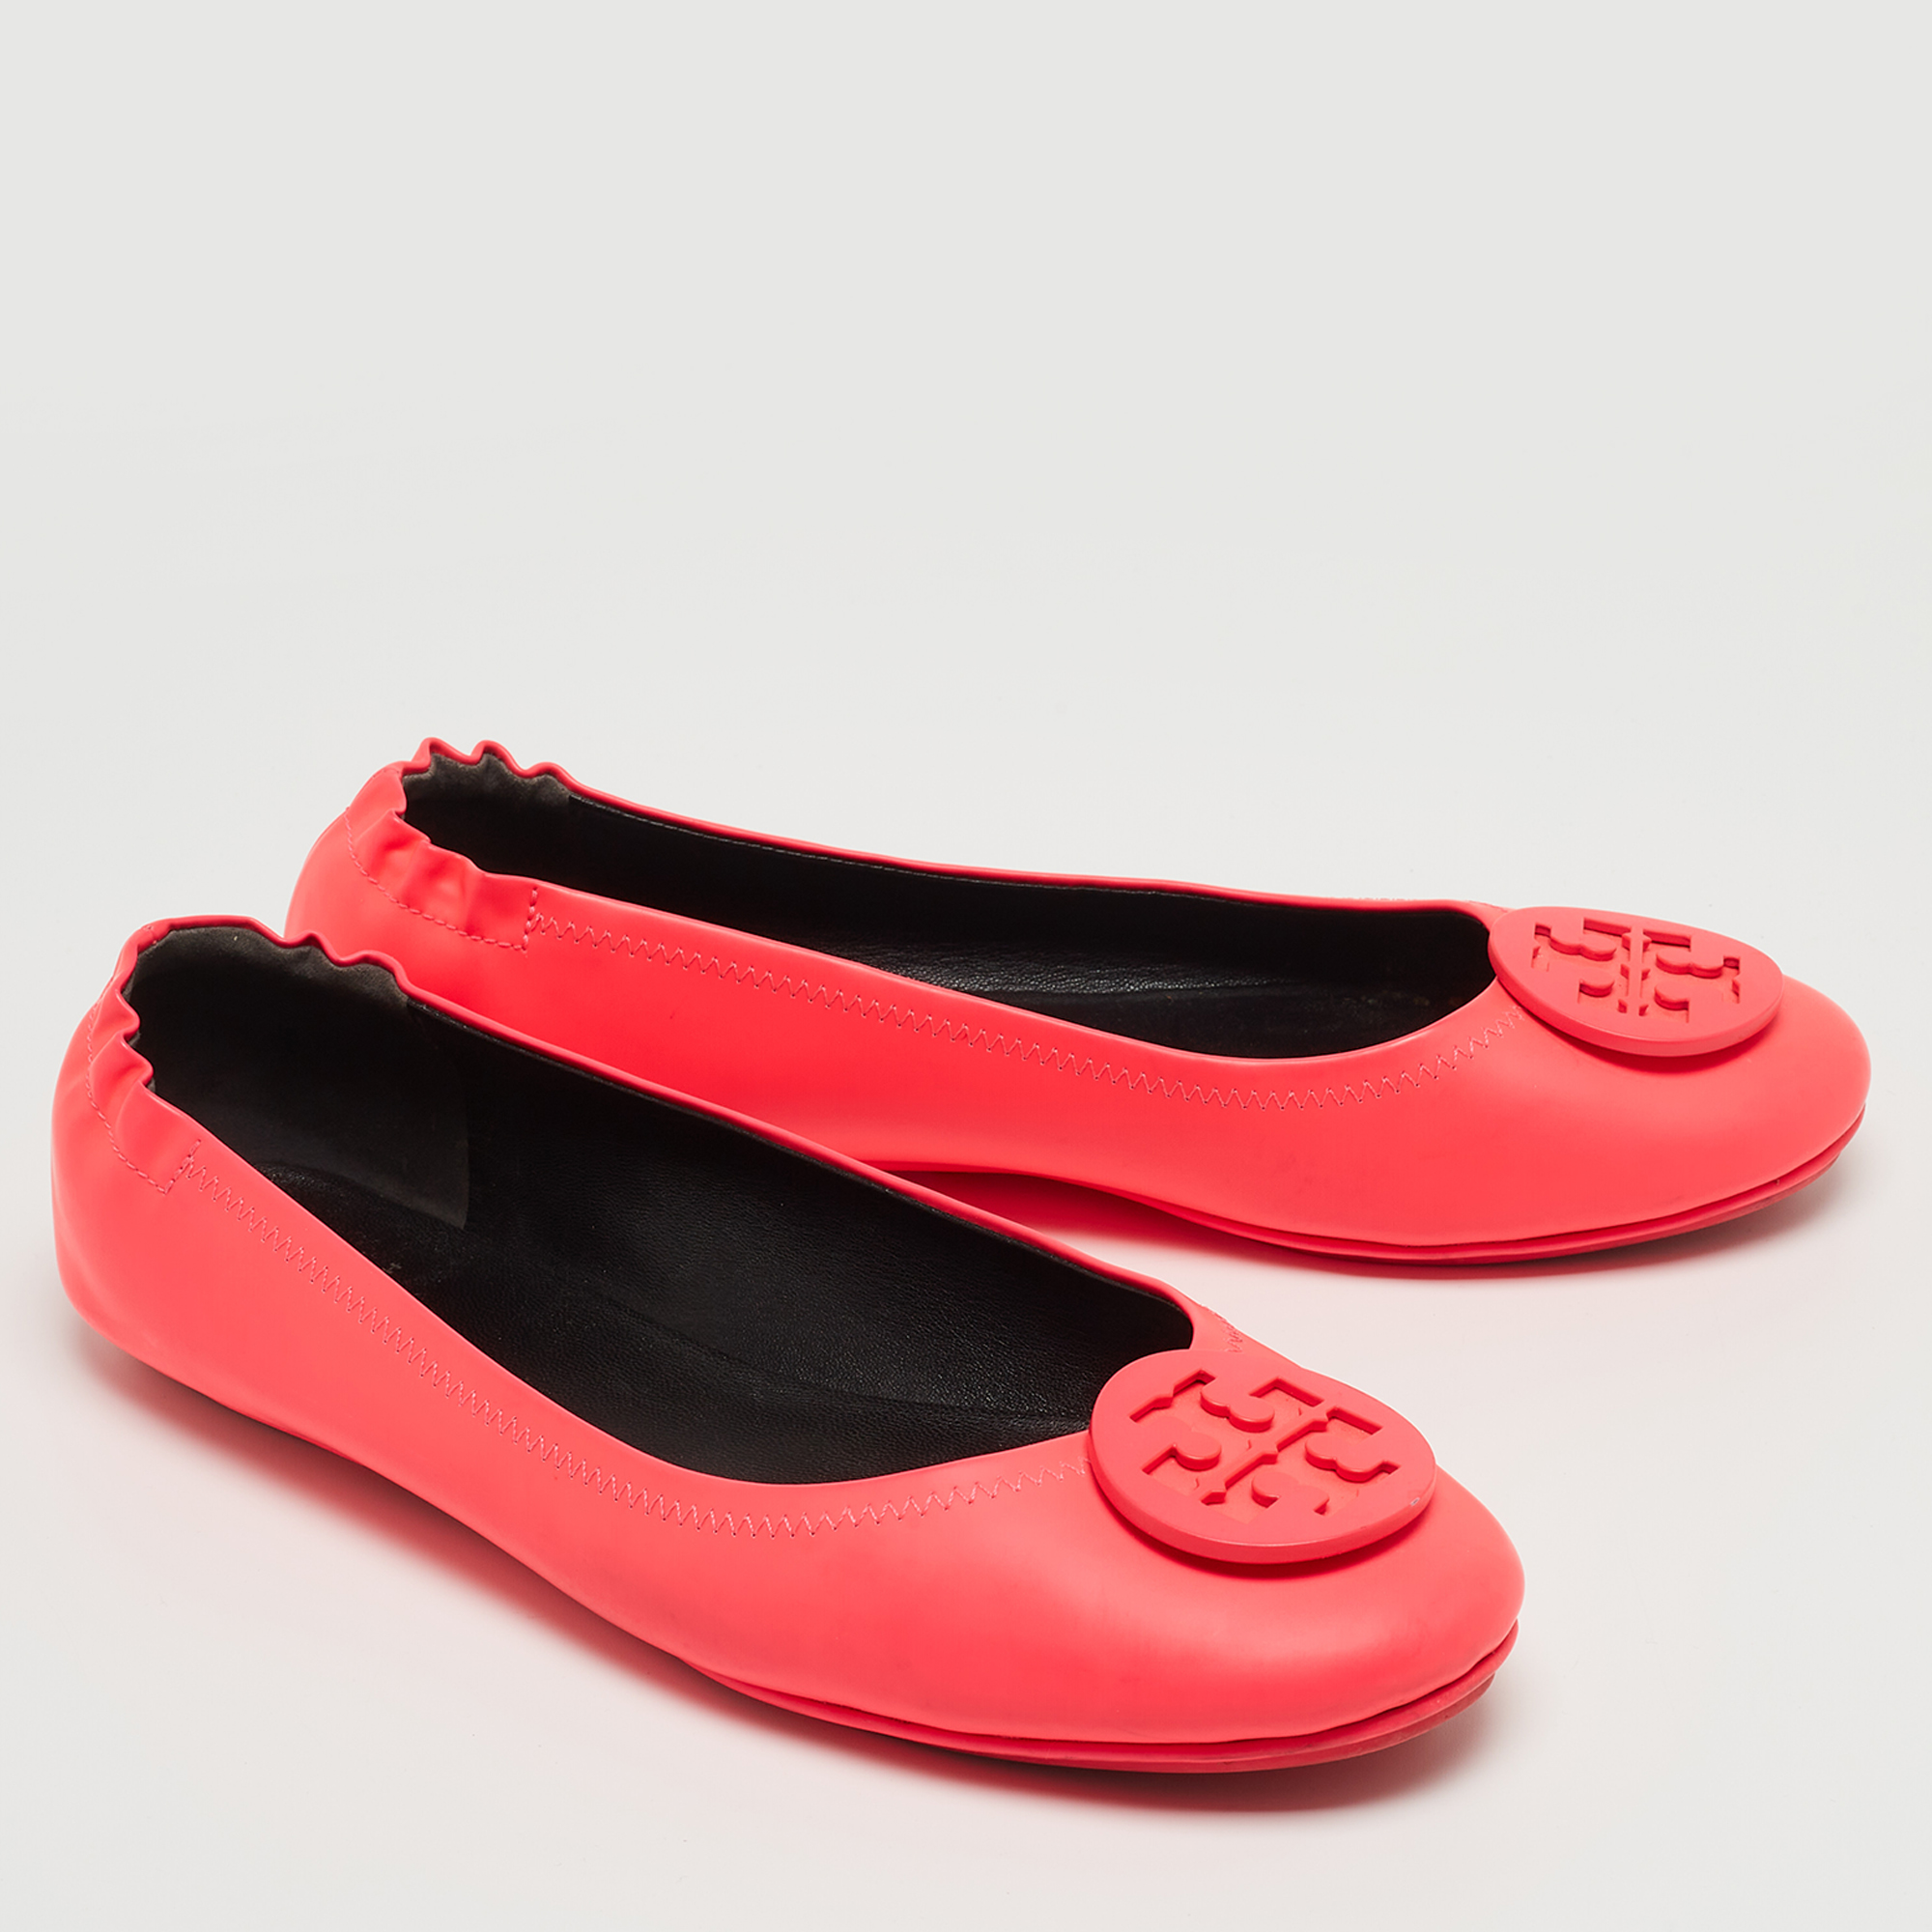 Tory Burch Neon Pink Leather Reva Ballet Flats Size 40.5